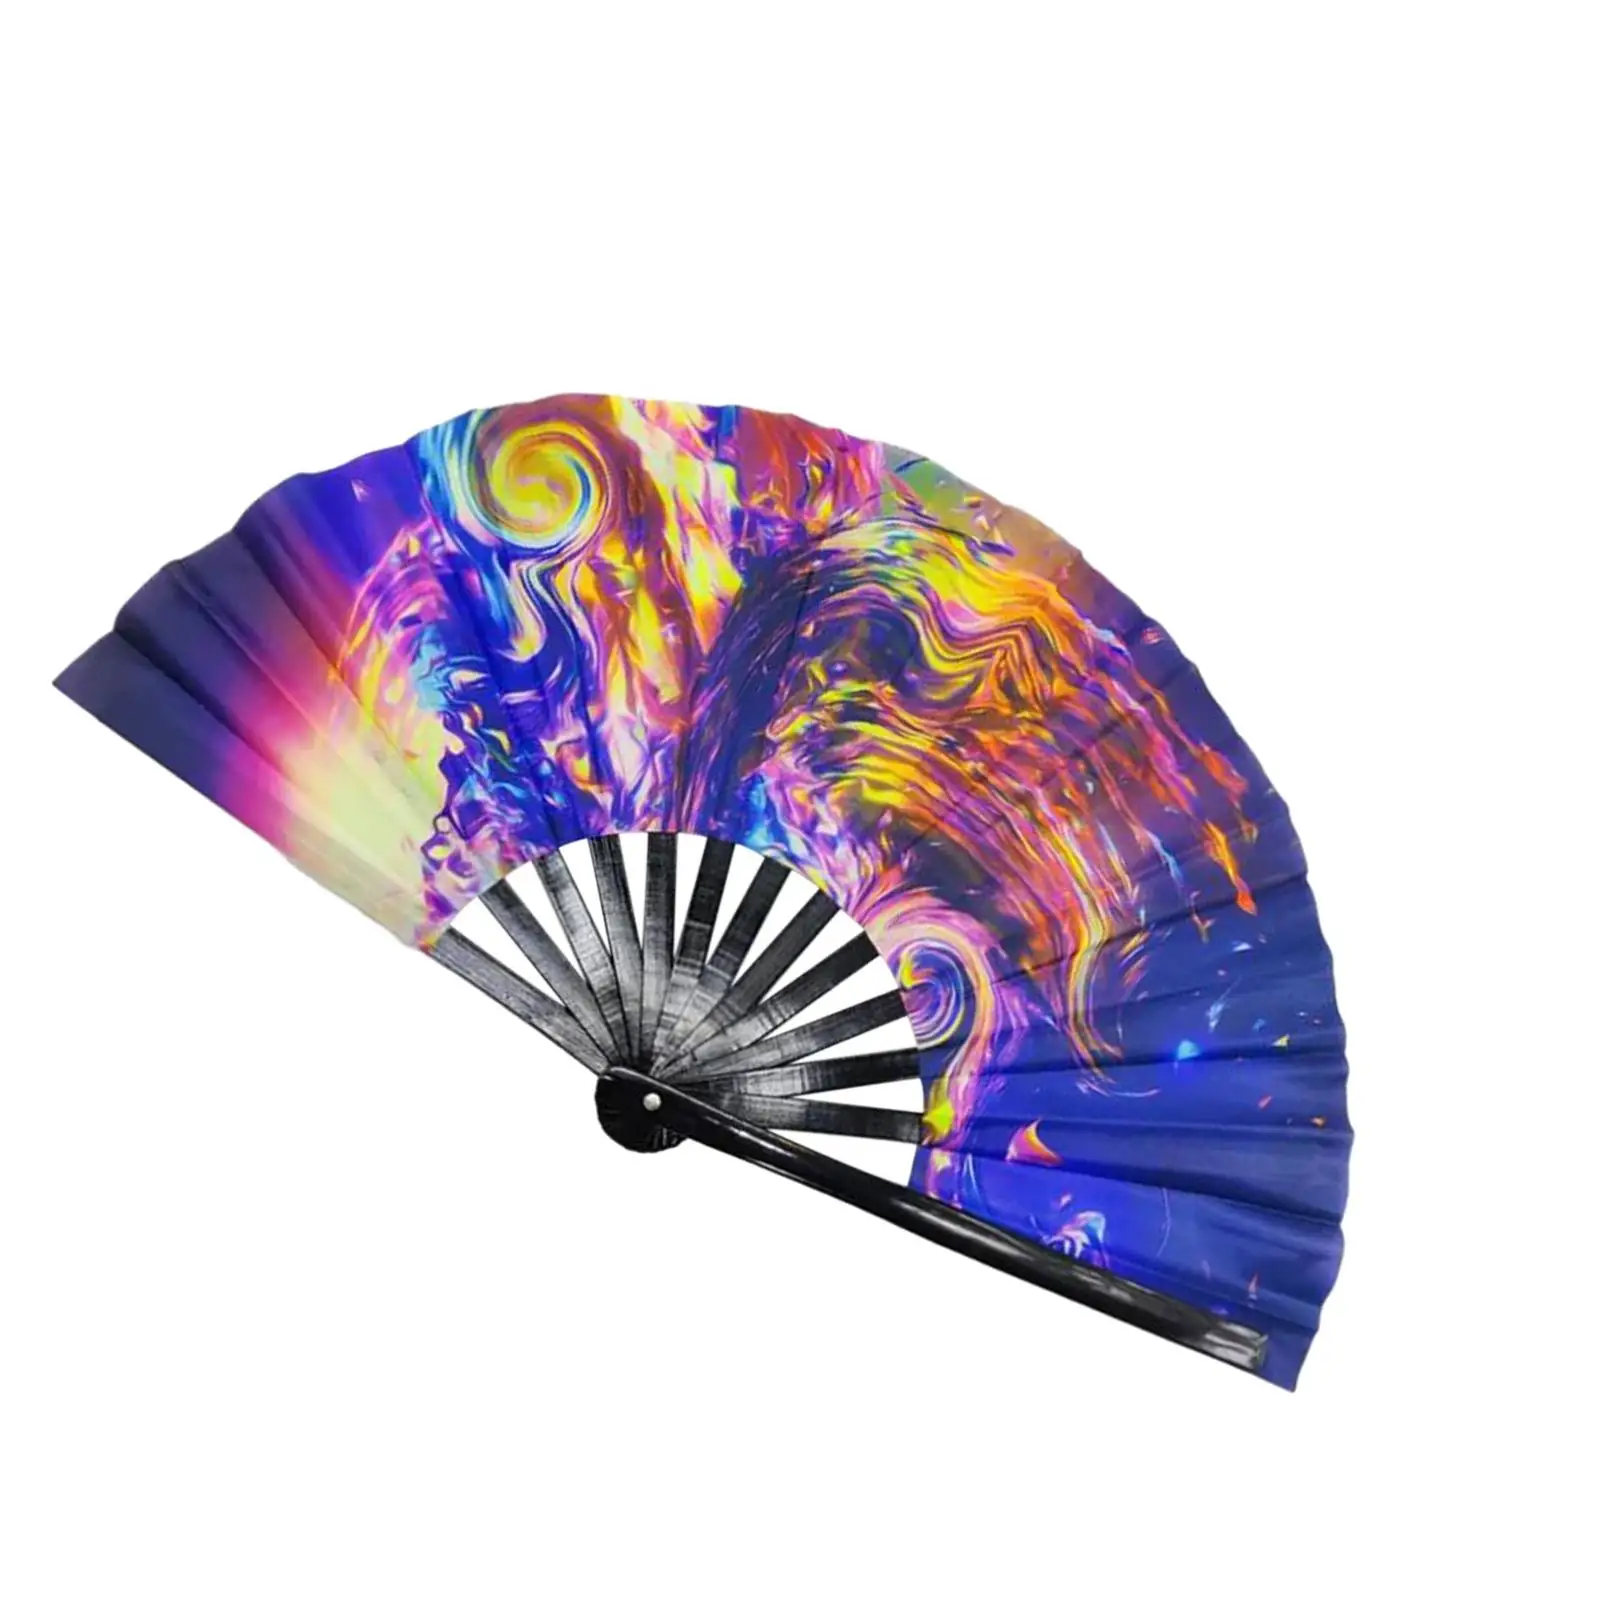 Rave Folding Hand Fan Fluorescent Effects Dress up for Dancing Props Masquerade Stage Show Performance Theater Party Accessories